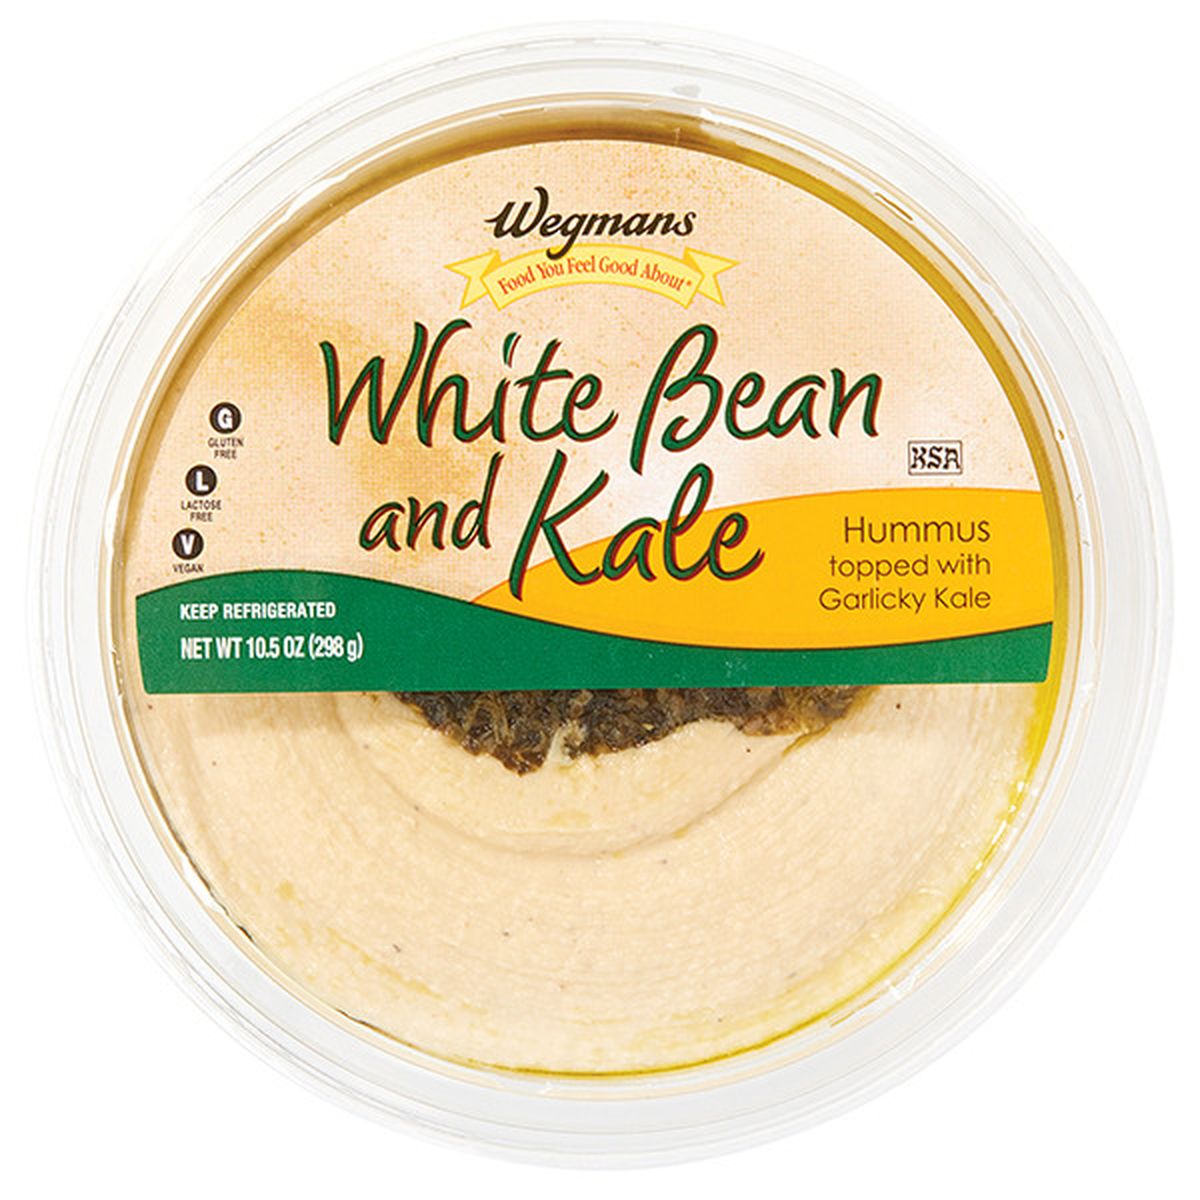 Calories in Wegmans White Bean Hummus Topped with Garlicky Kale